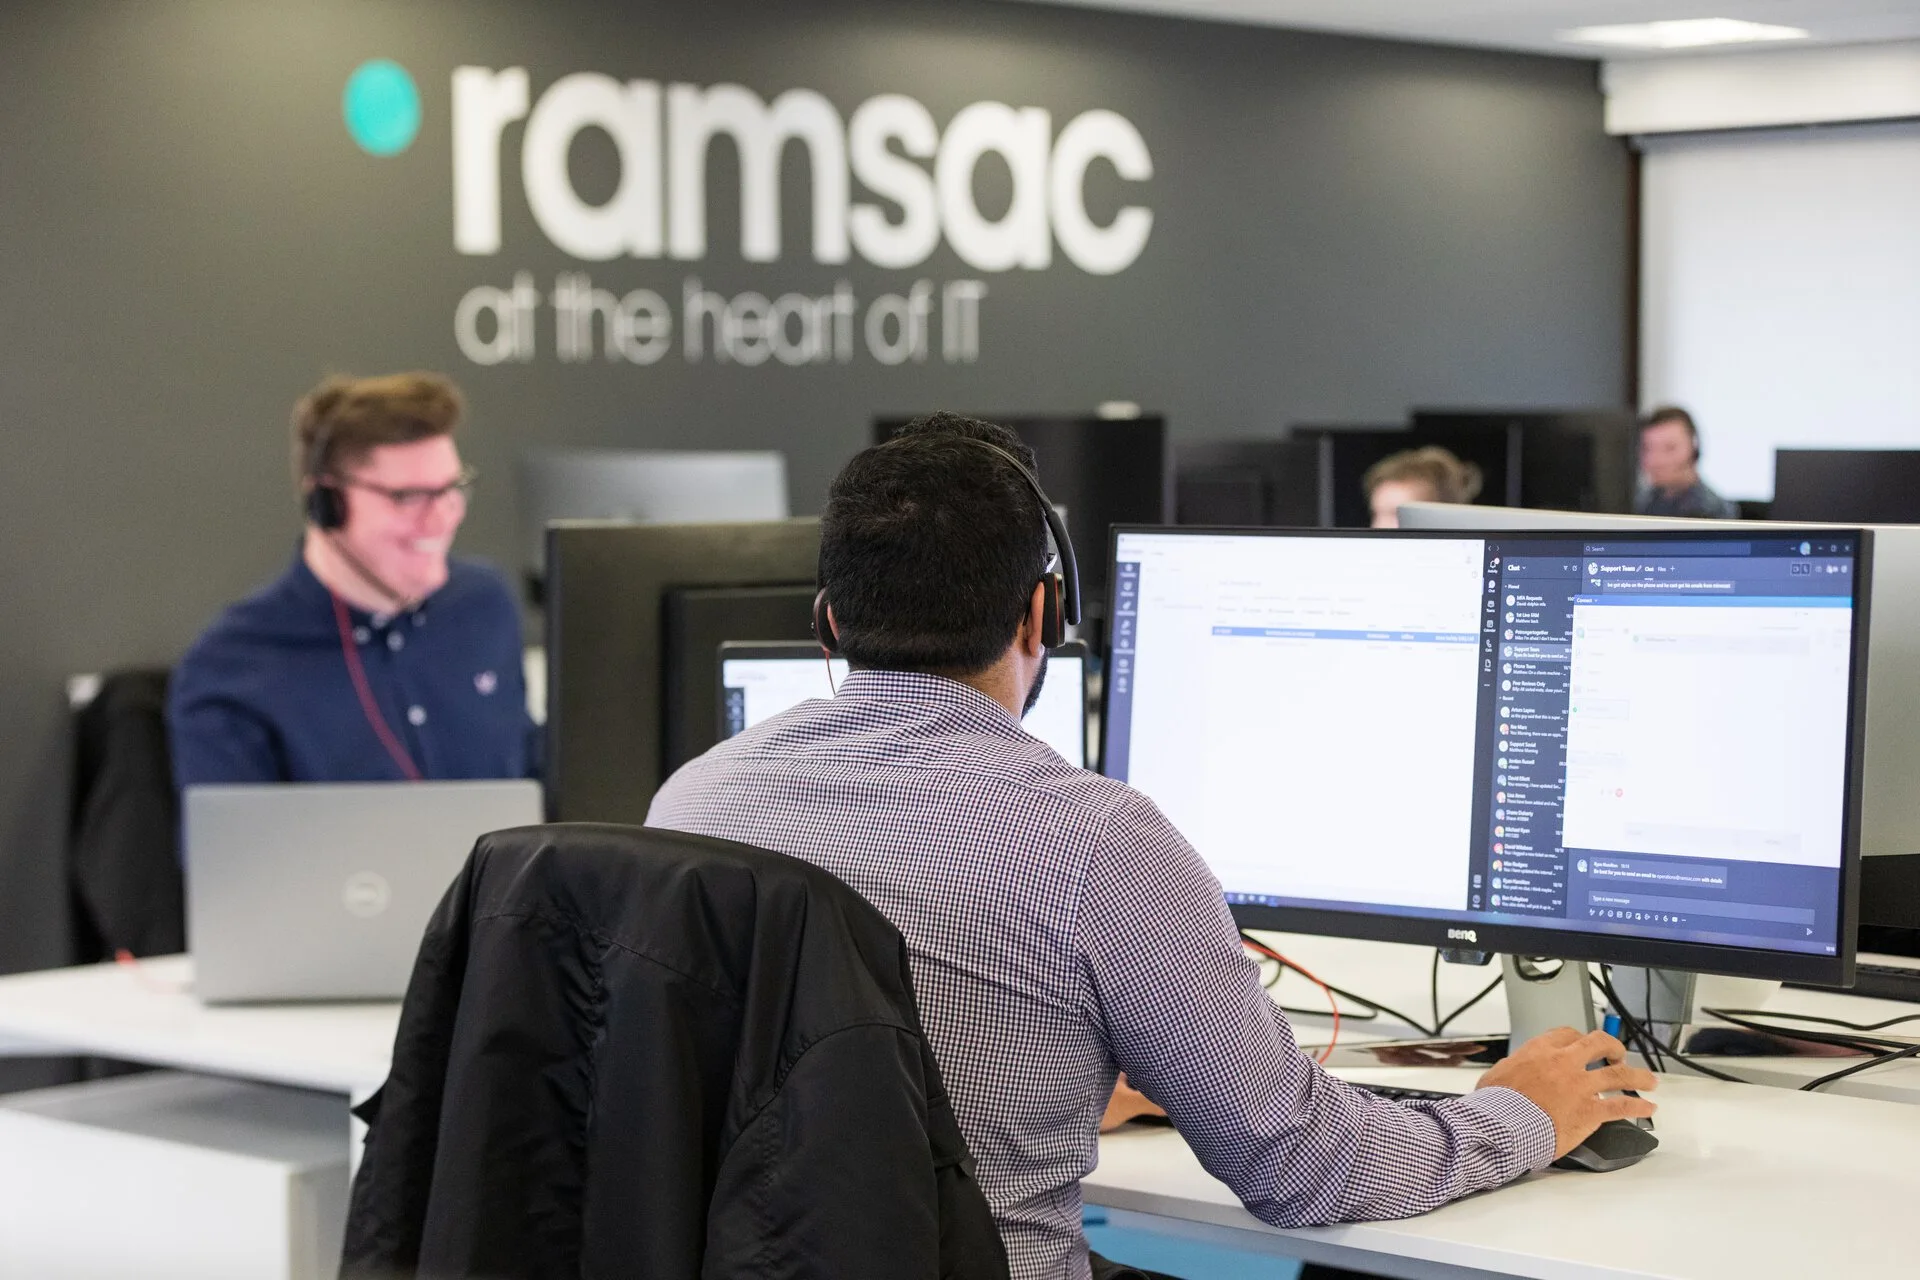 ramsac team at work on project